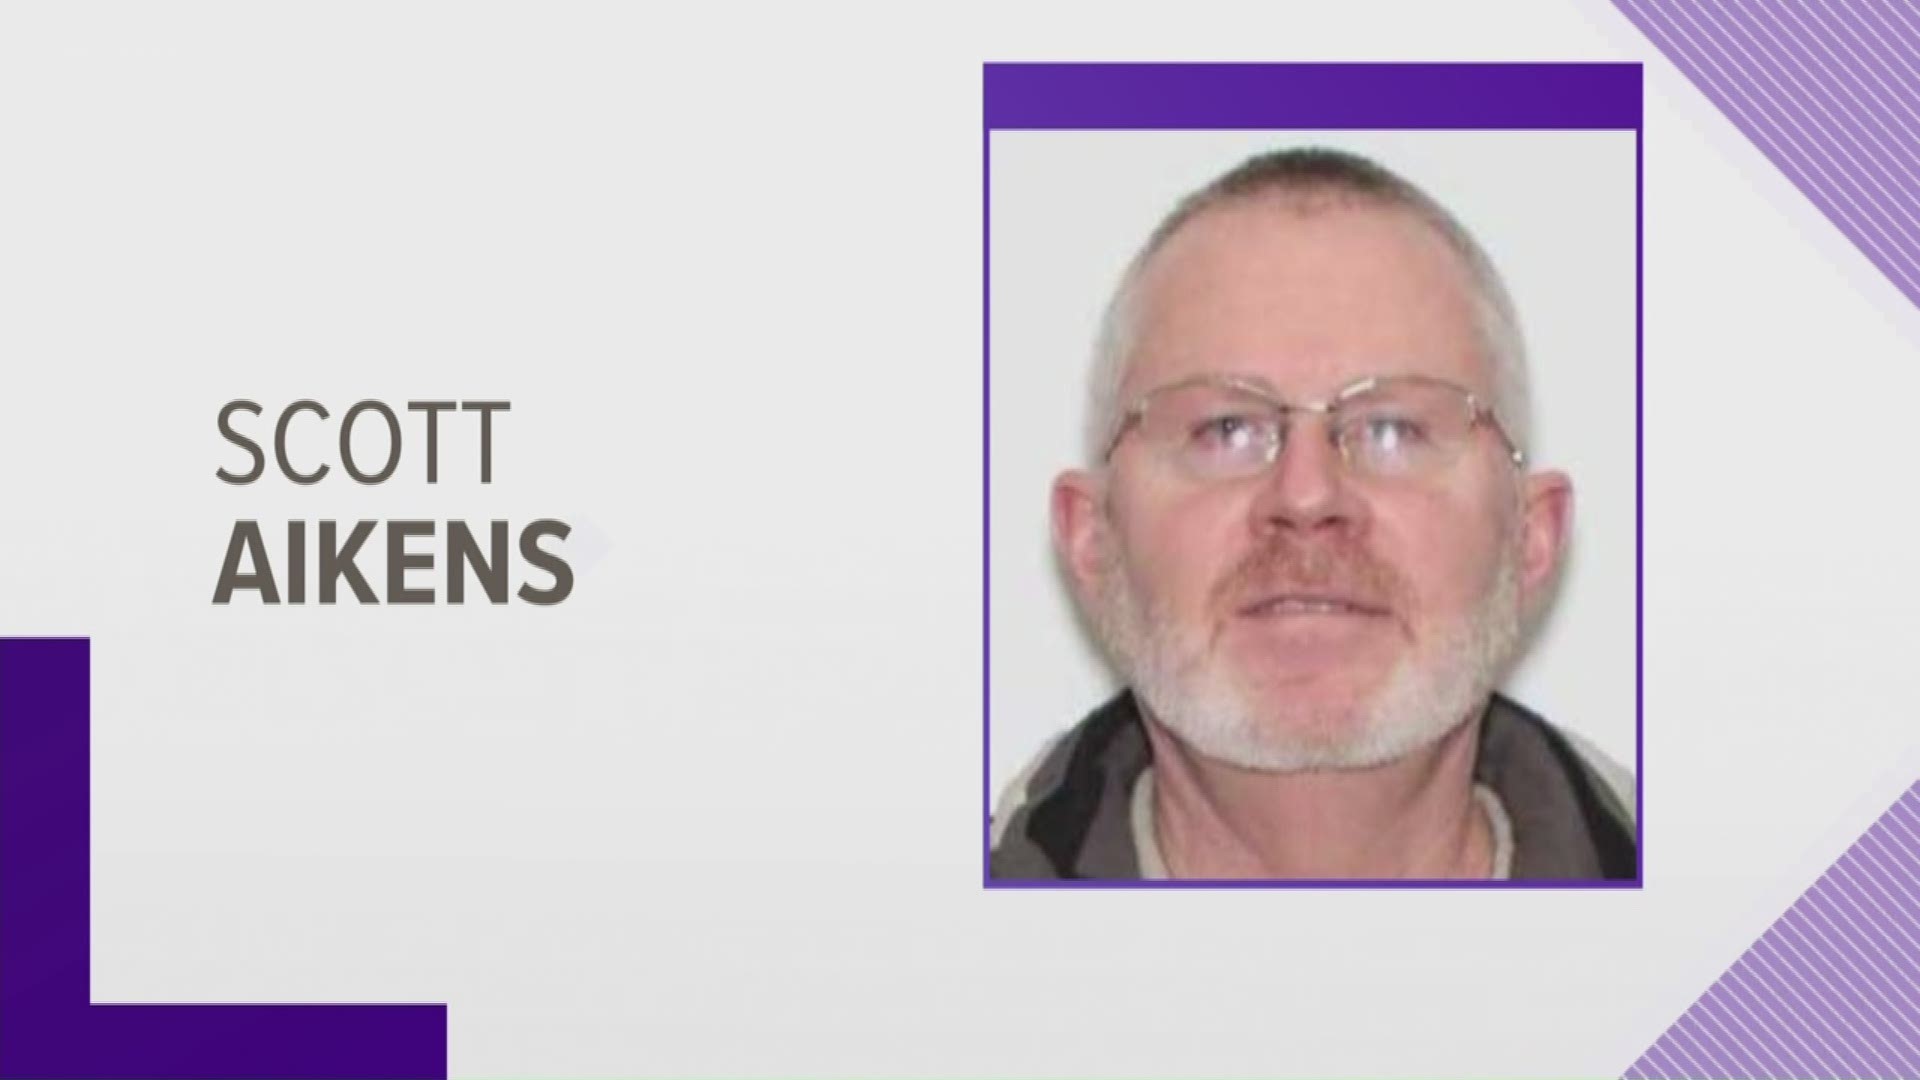 61-year-old Scott Aikens admitted to the charge earlier this year.